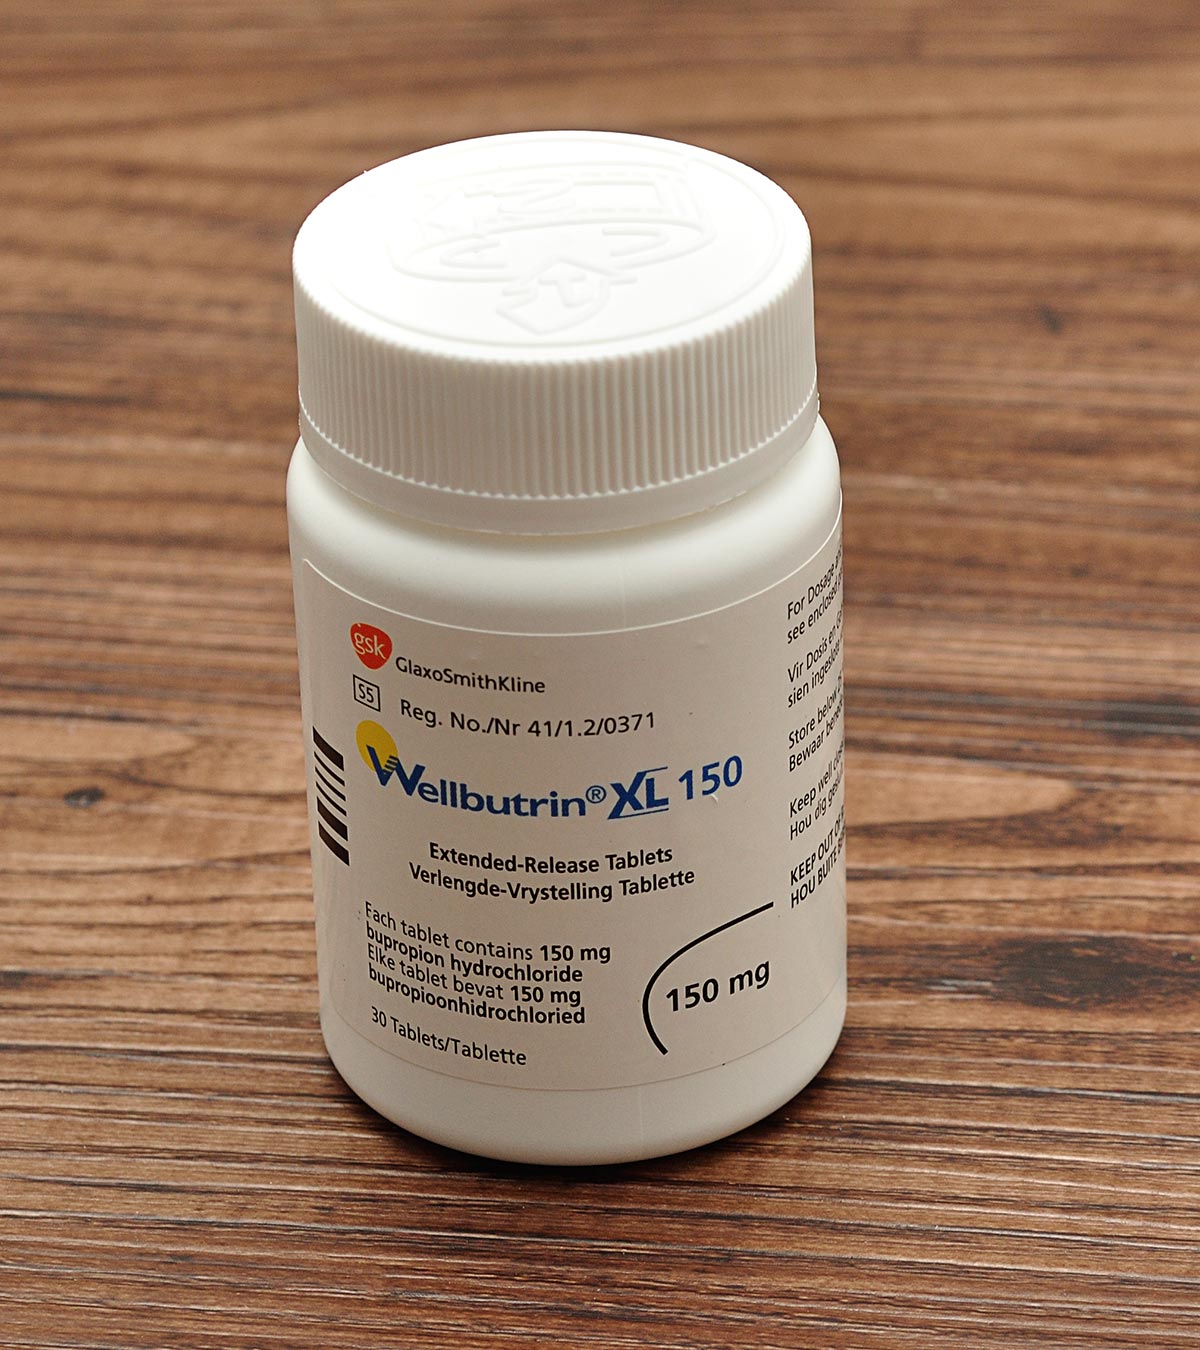 Is It Safe To Take Wellbutrin And Xanax